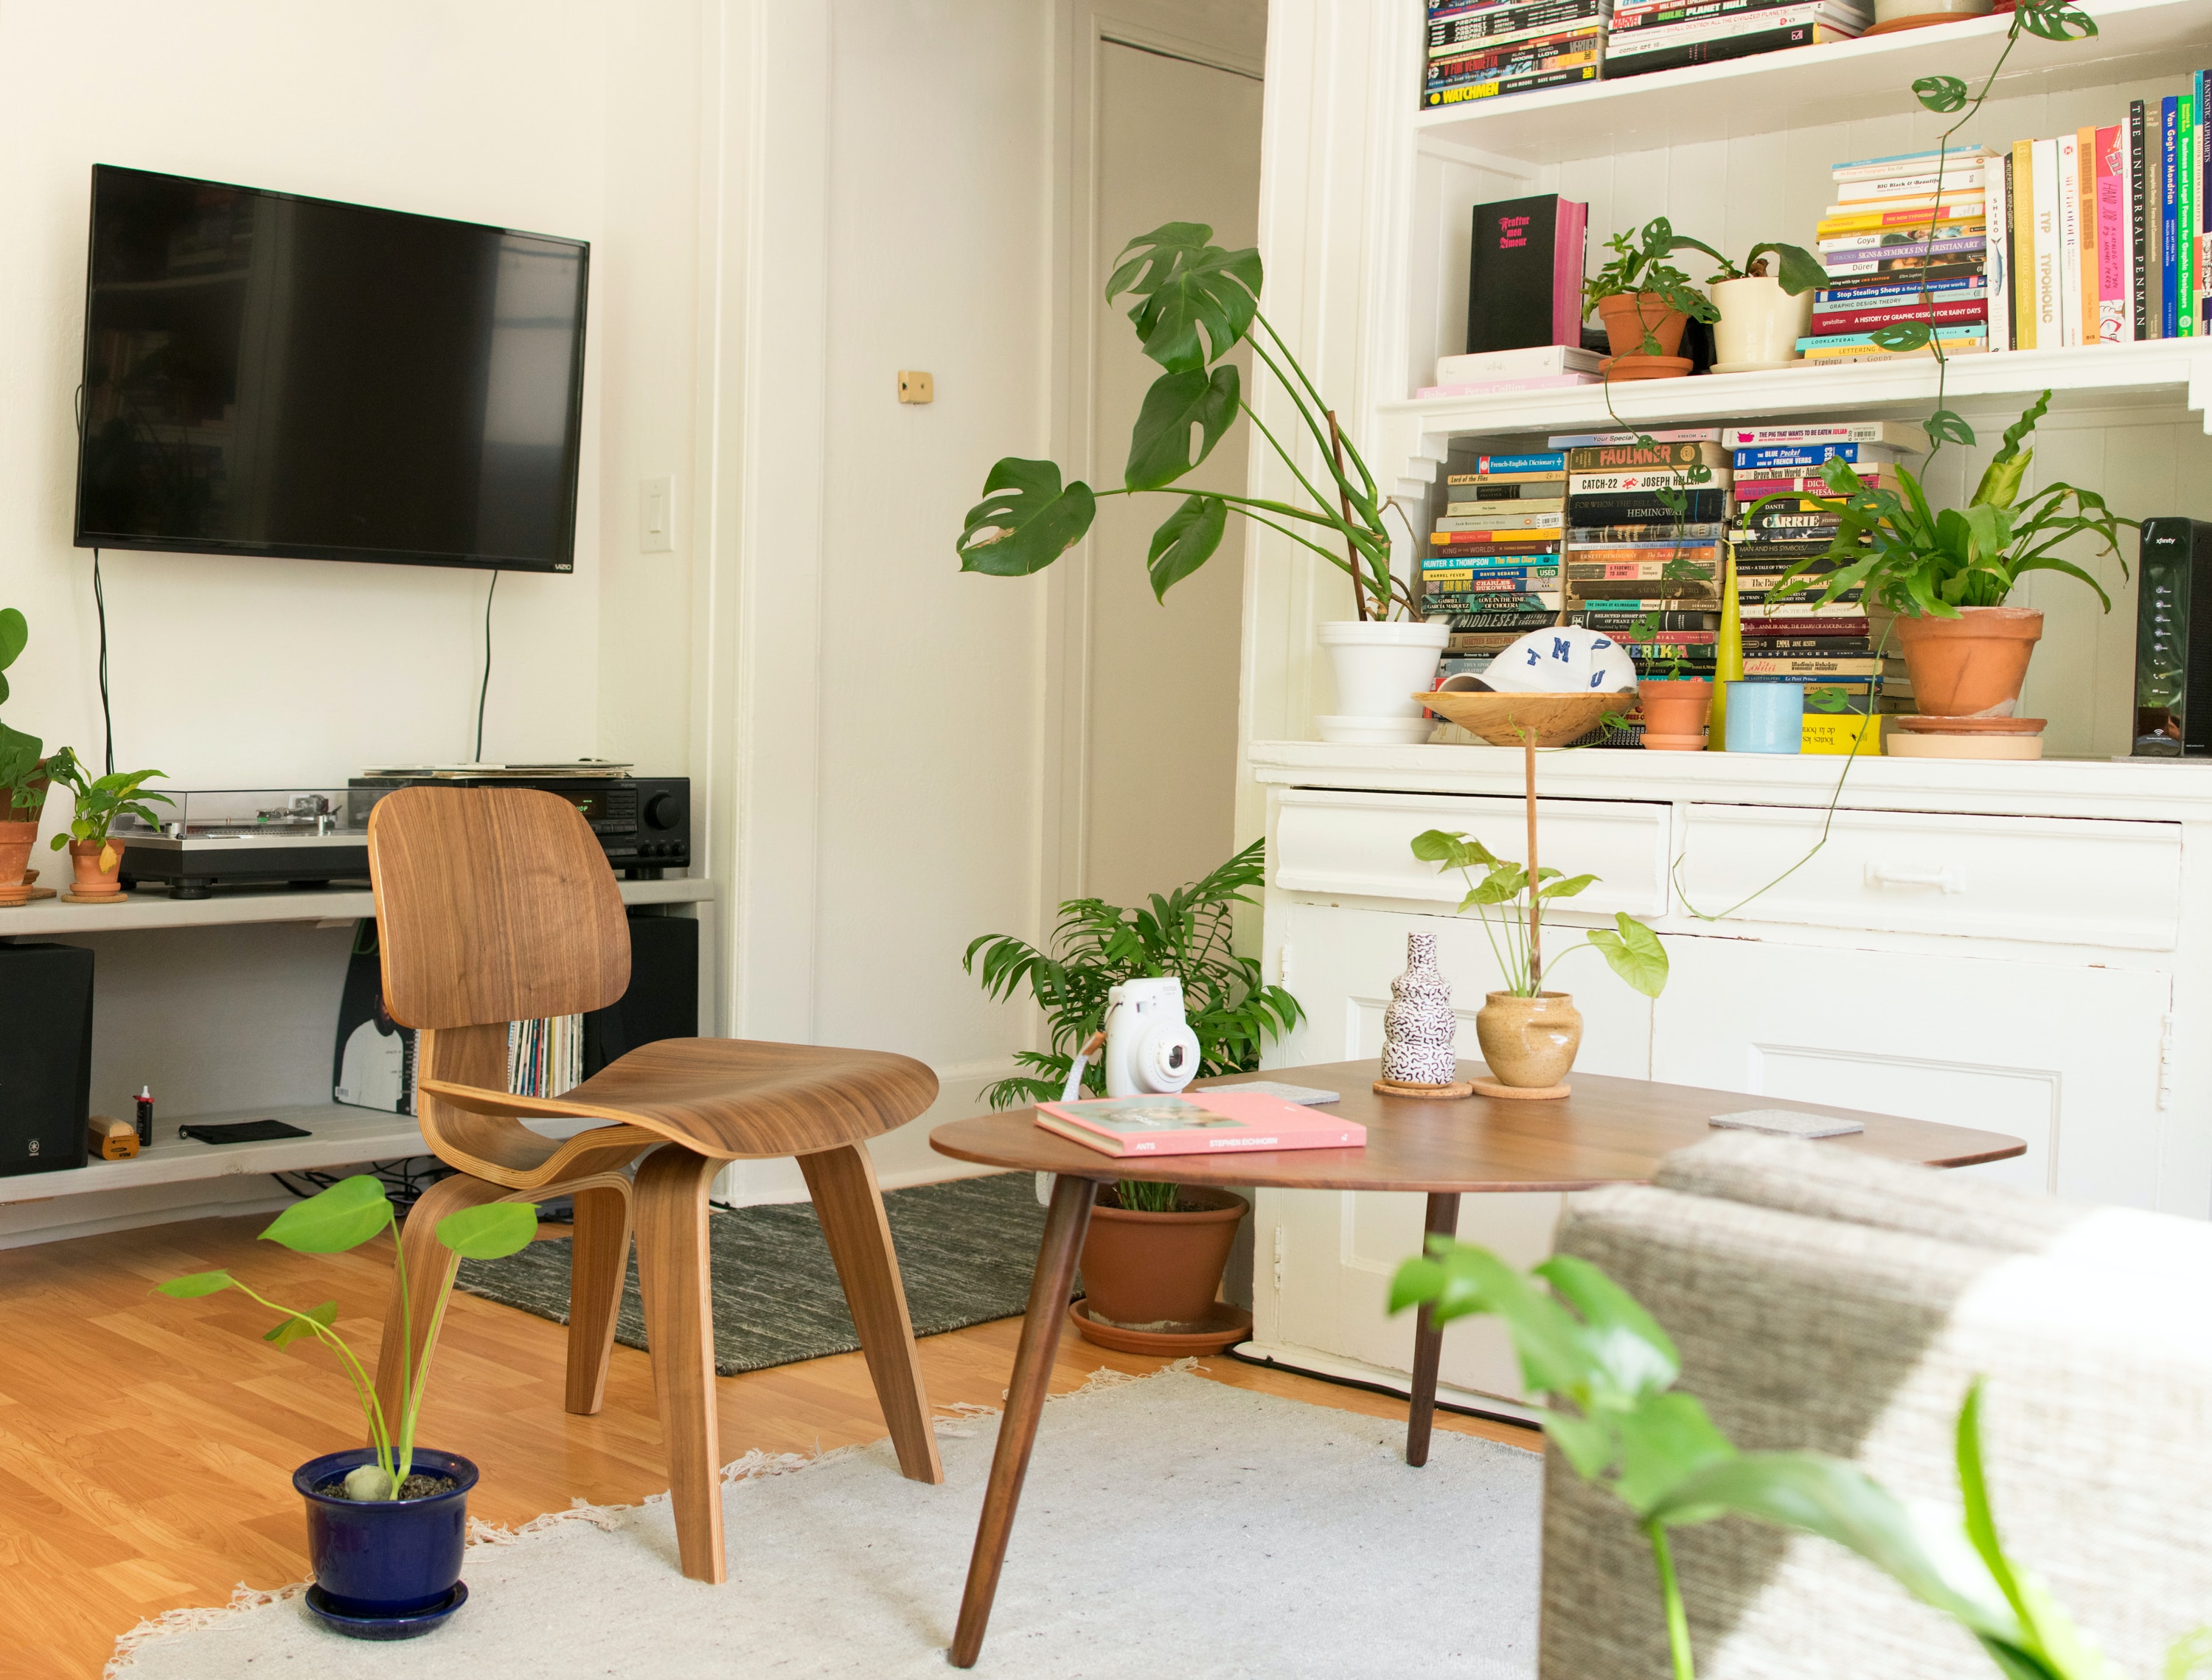 Living room in a rental apartment or home with a TV, books, plants, and furniture.